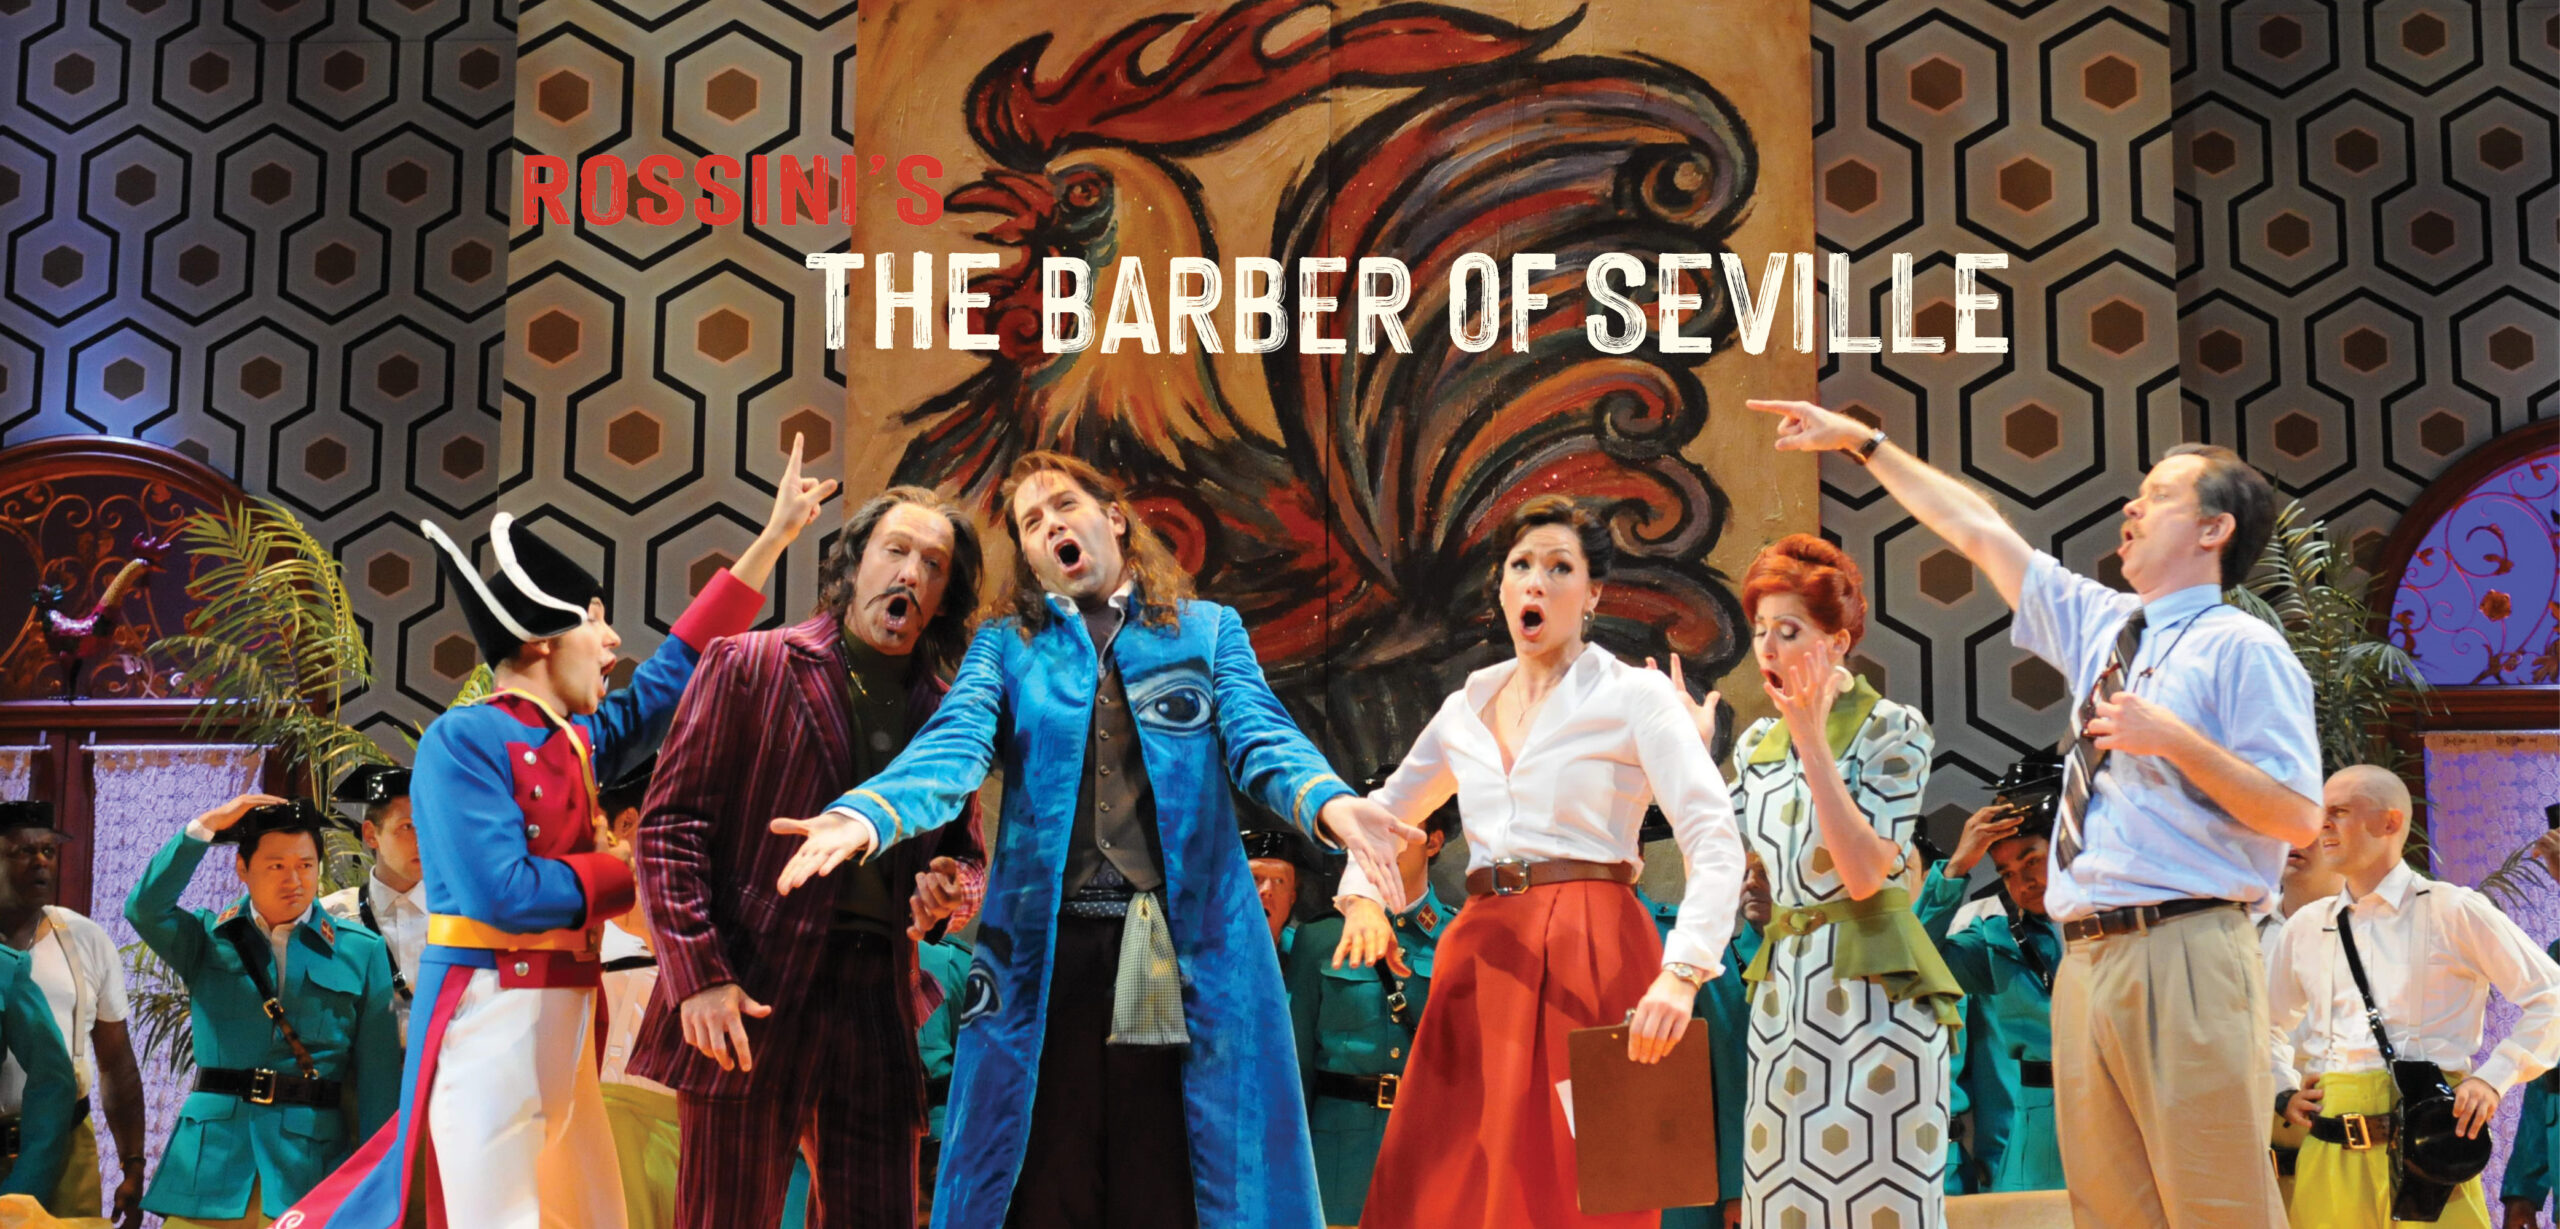 Barber of Seville makes the cut in Austin